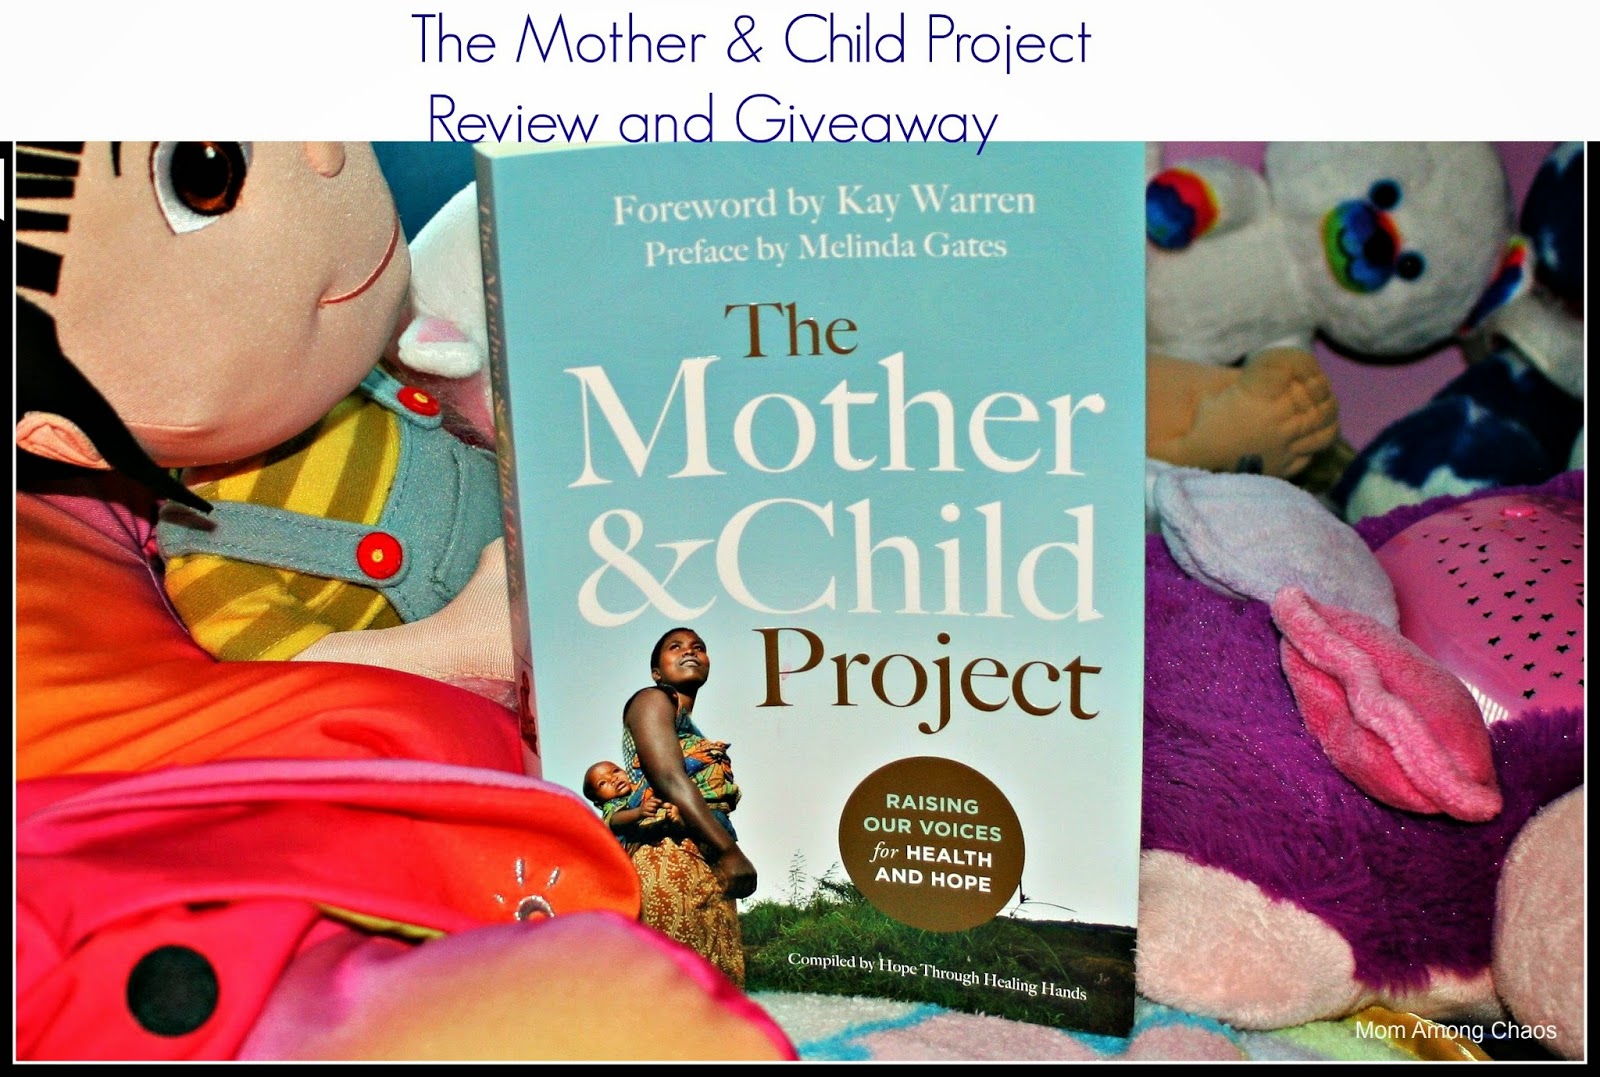 The Mother & Child Project, Family Christian, #FCBlogger, family, mom, clean water, Christian, child spacing, birth control, giveaway, prizes